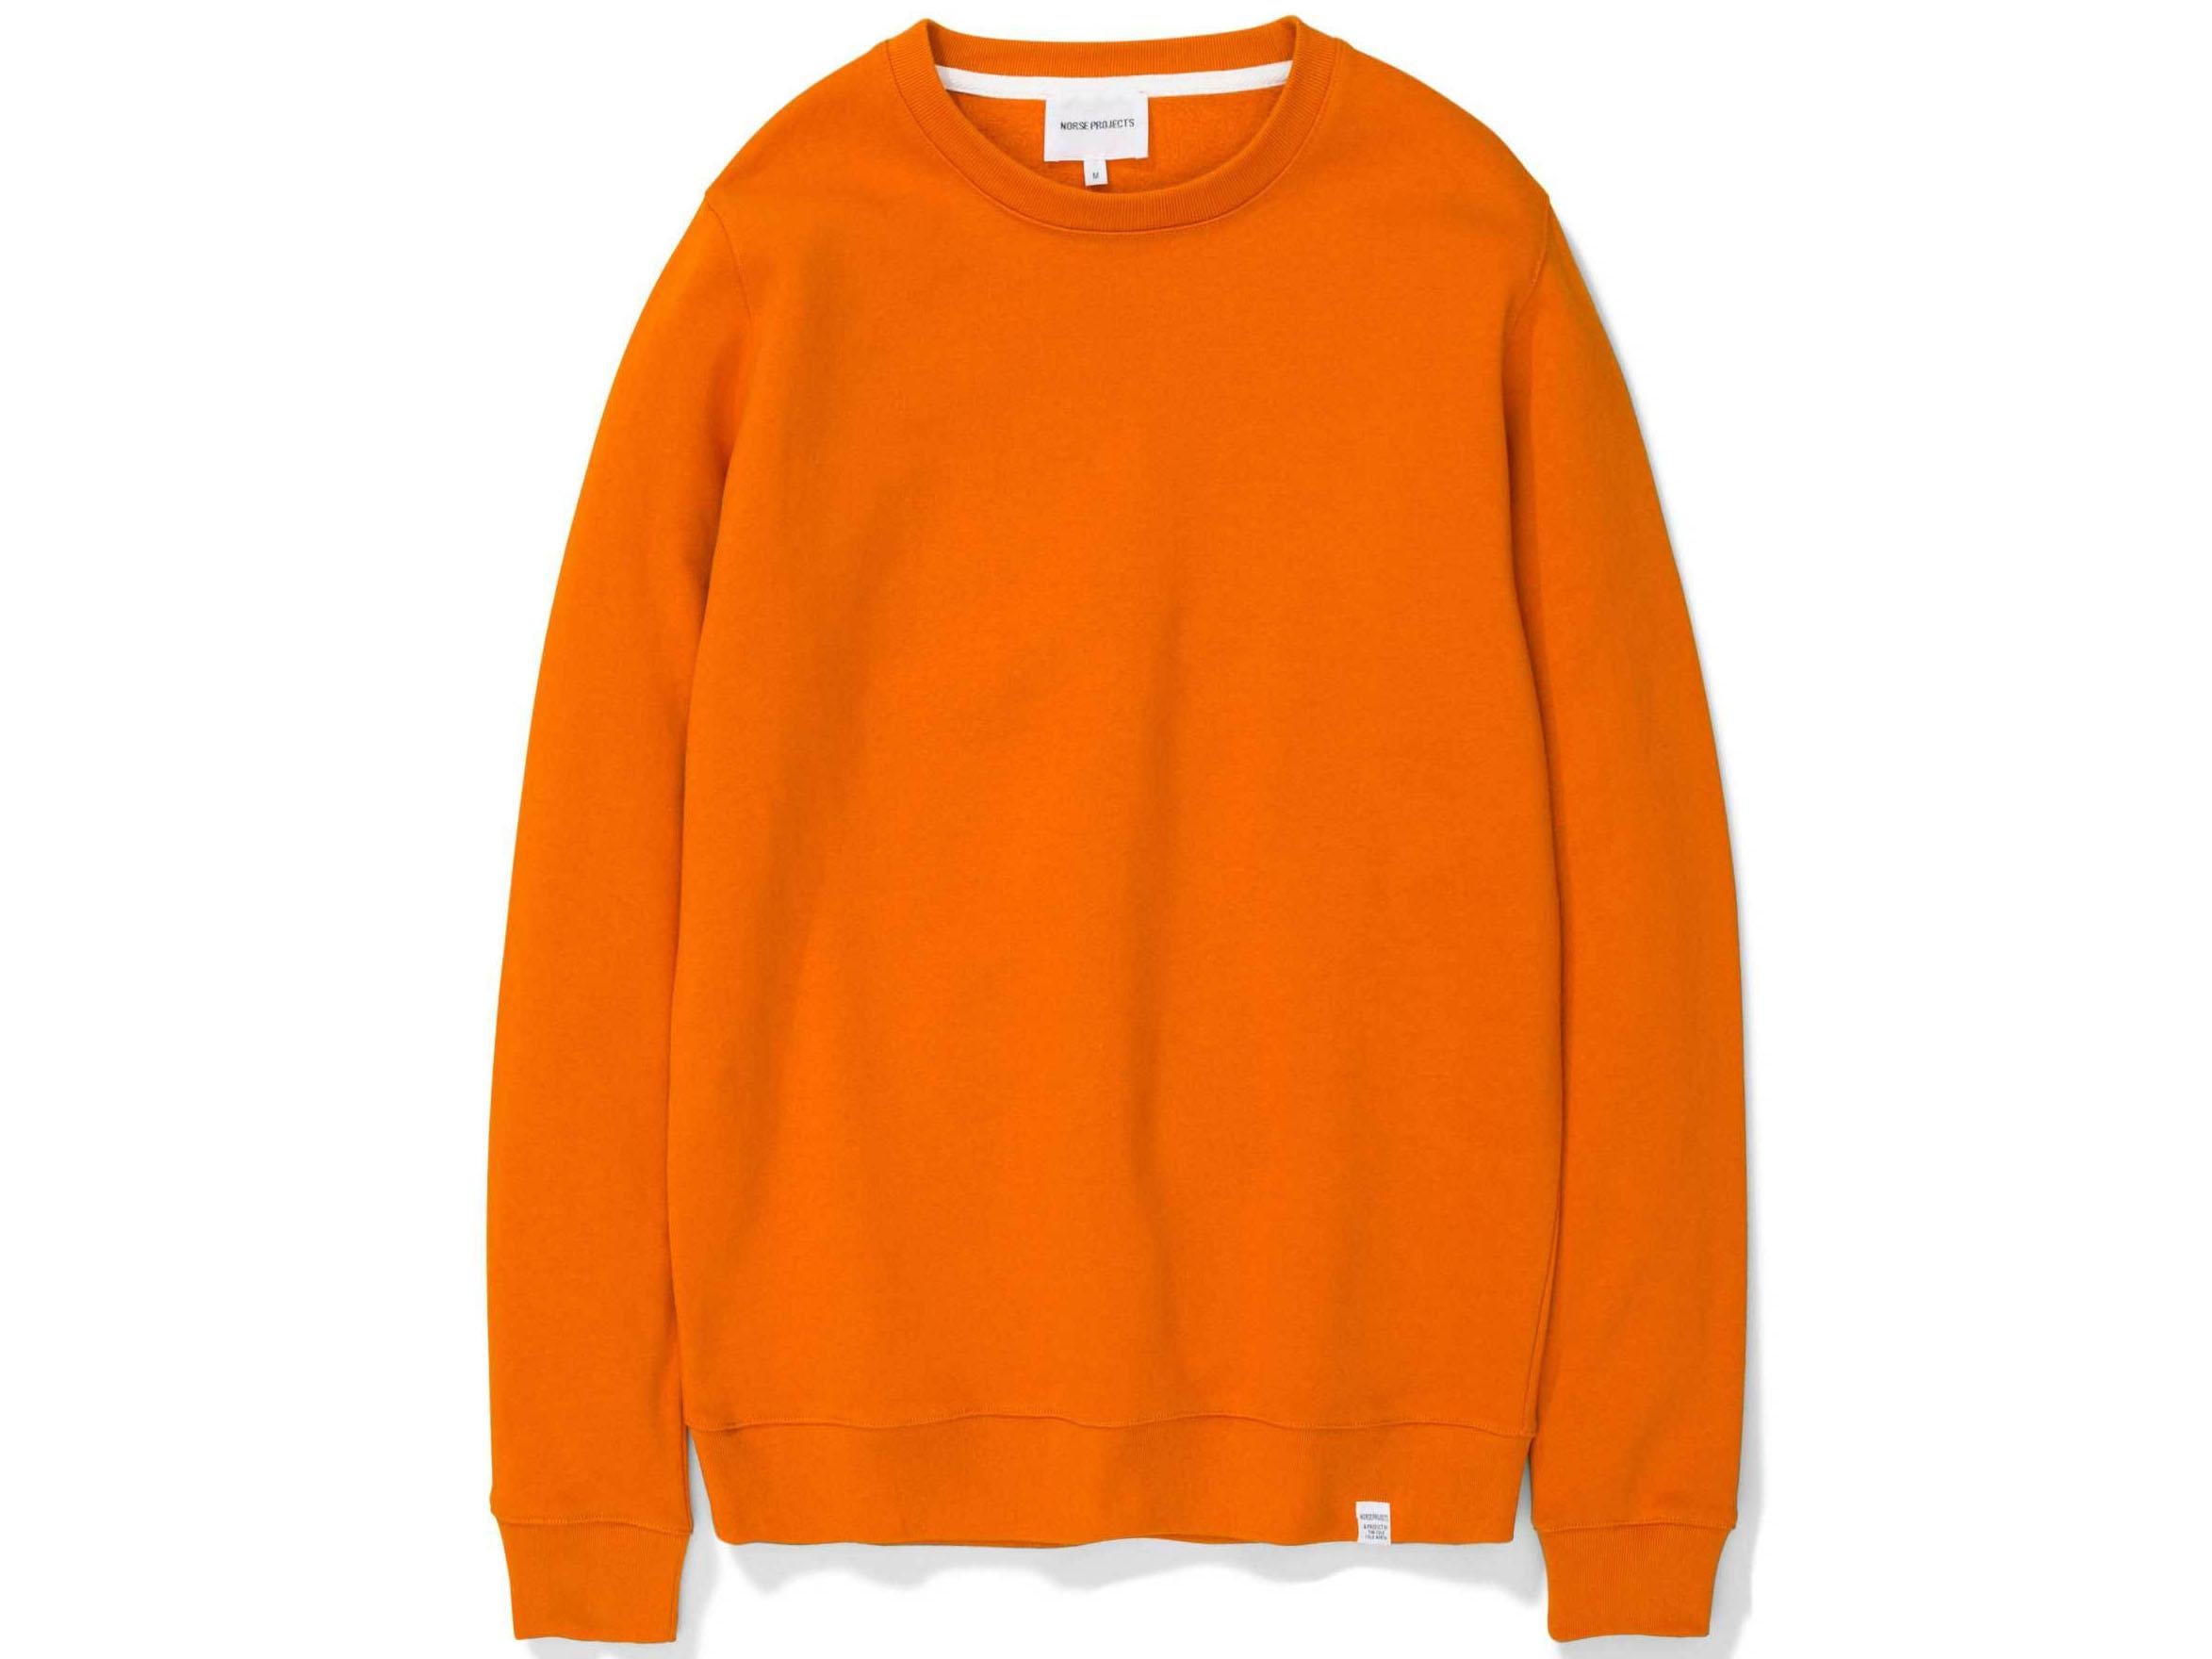 Vagn Classic Crew, £90, Norse Projects